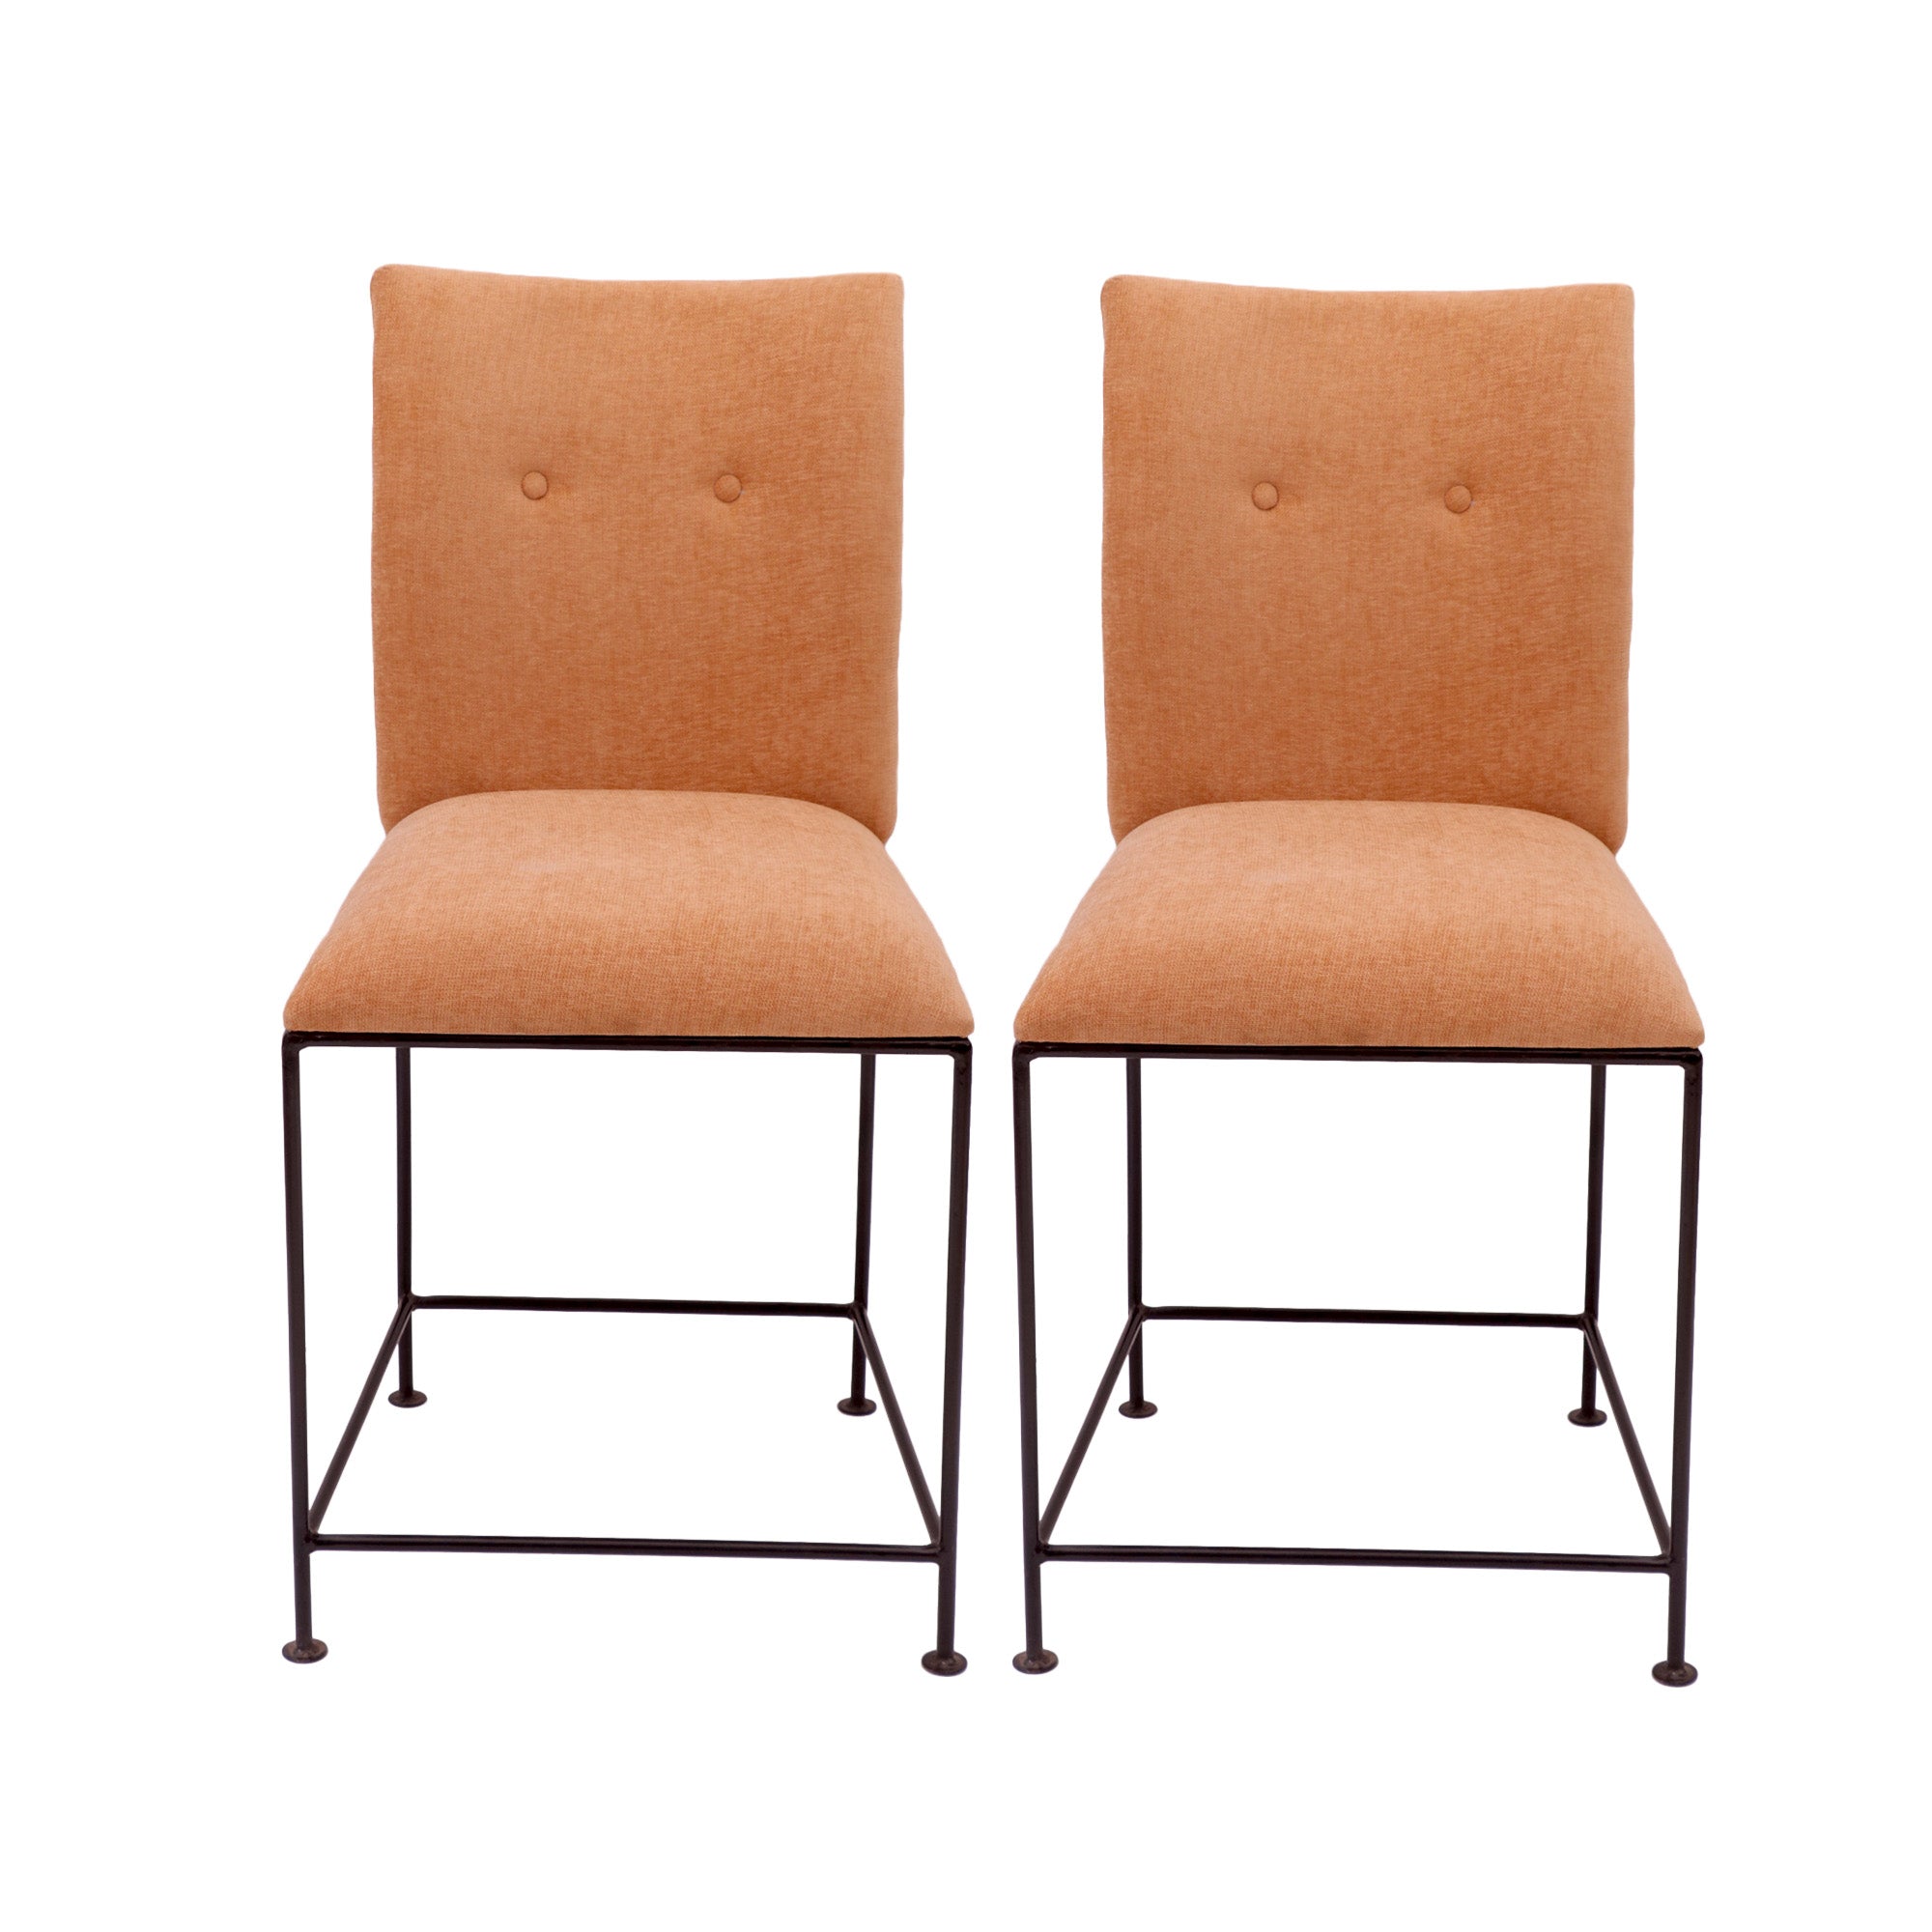 (Set of 2) Inclined Upholstered Neutral Chair Dining Chair